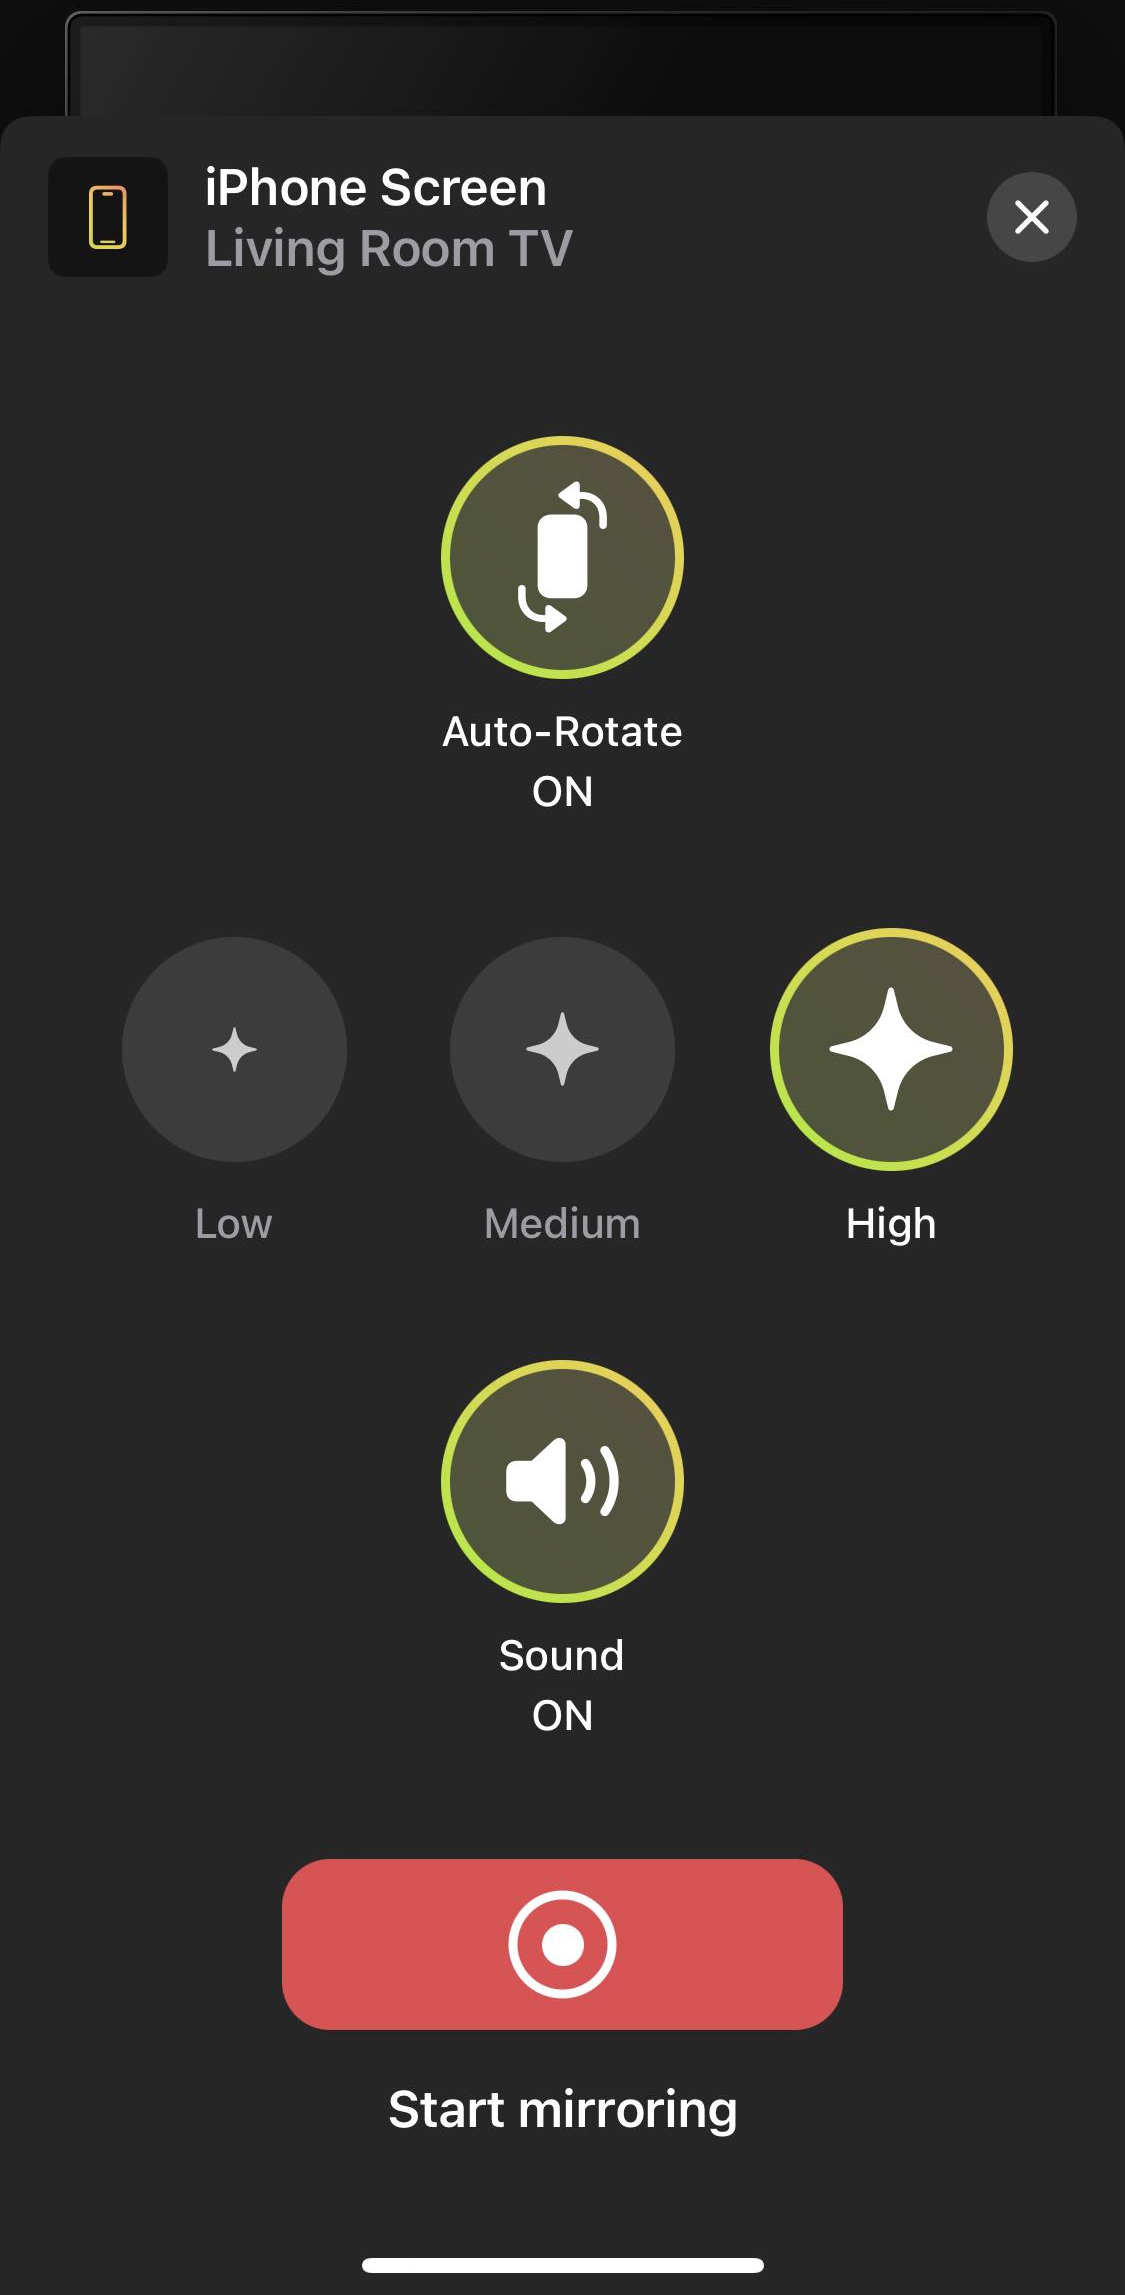 Set the mirroring parameters in the DoCast app and then tap on Start mirroring button